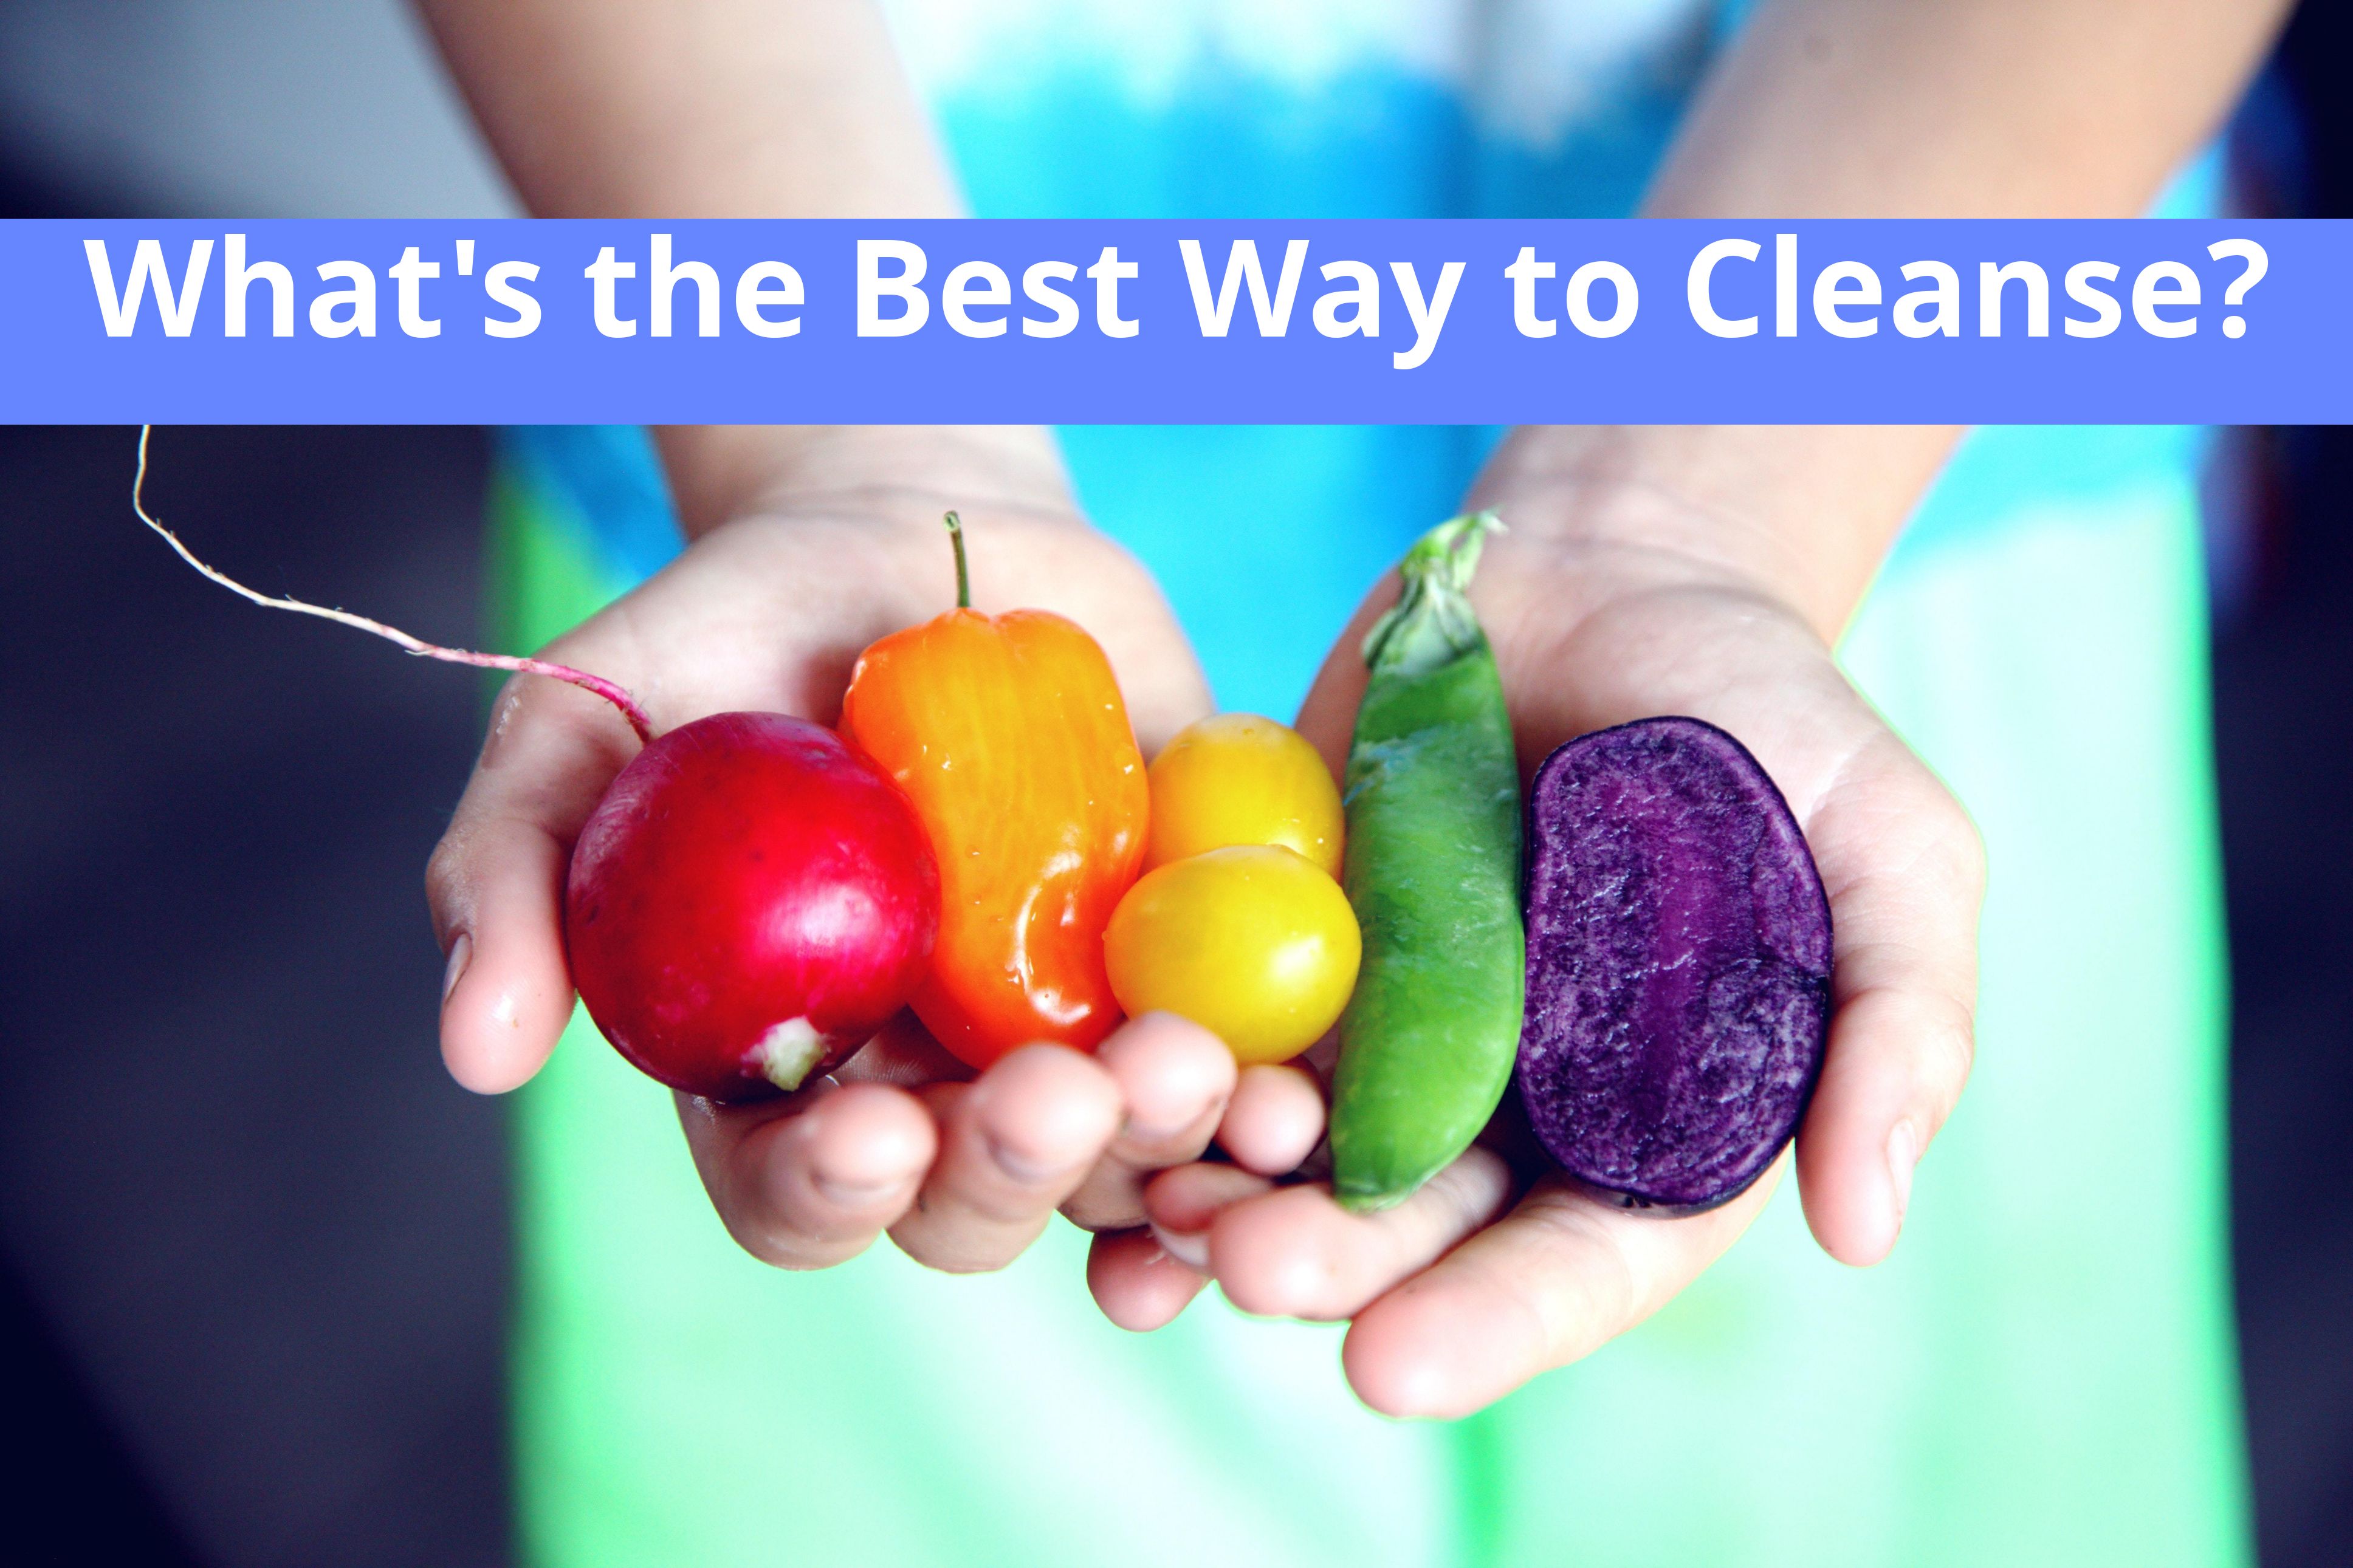 What's the best way to cleanse?